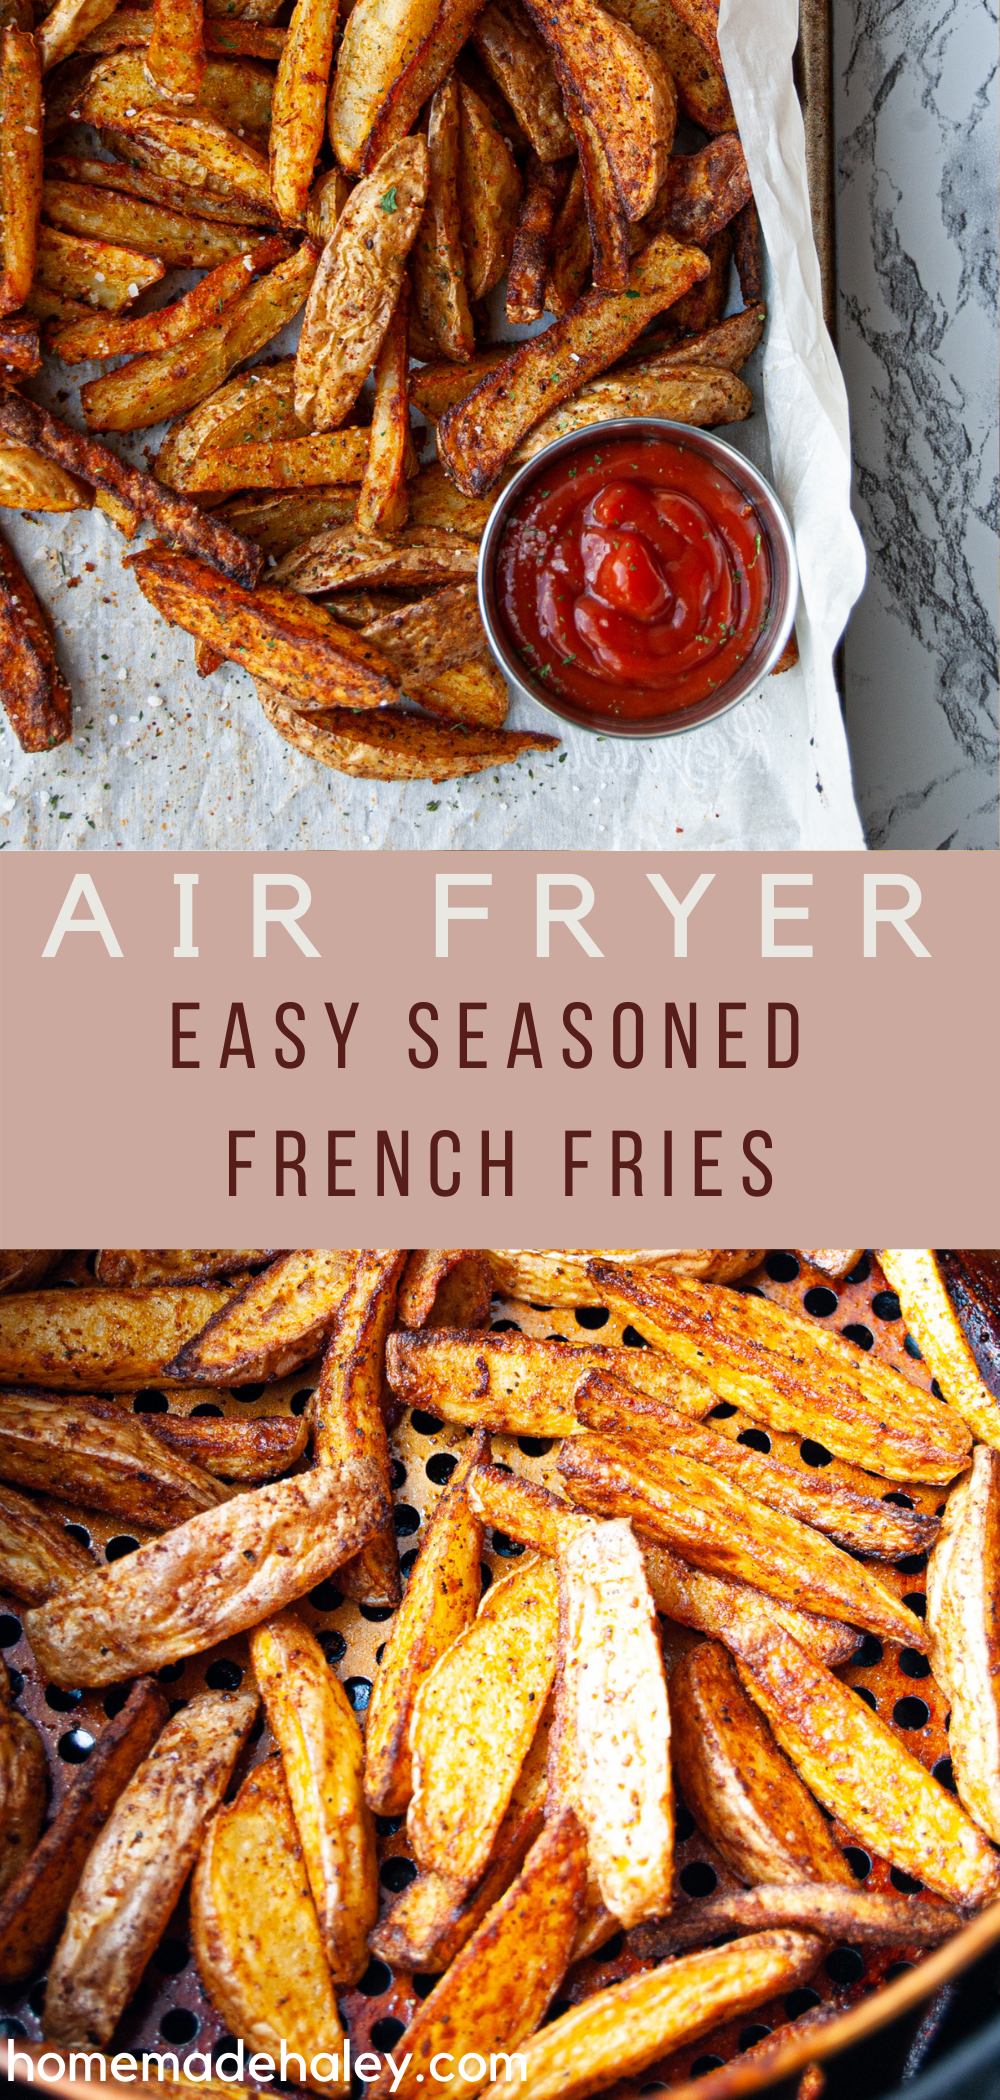 These Easy Seasoned French Fries can be made in either the oven or air fryer for a flavorful and crispy side. Perfect with your favorite dipping sauce!